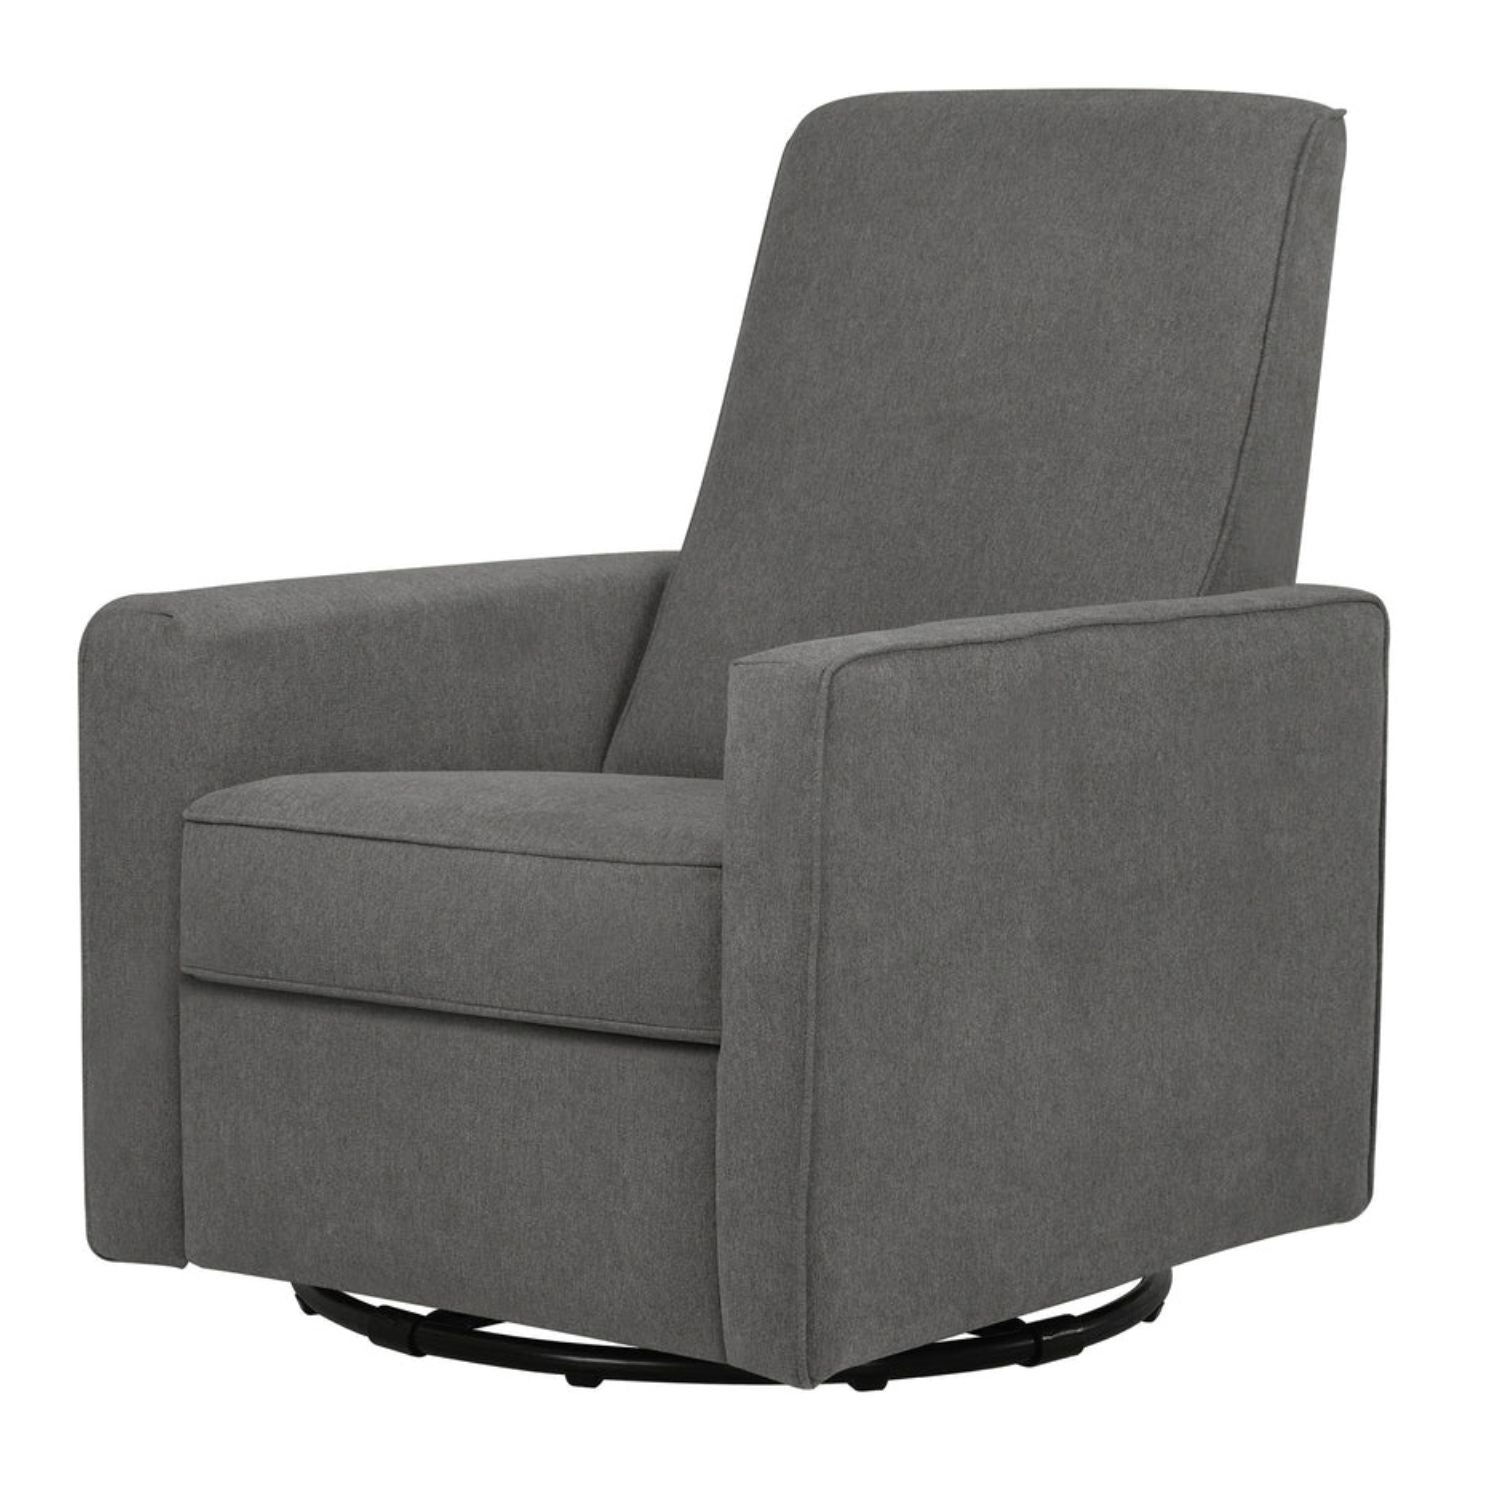 DaVinci Piper Recliner and Swivel Glider | The Baby Cubby